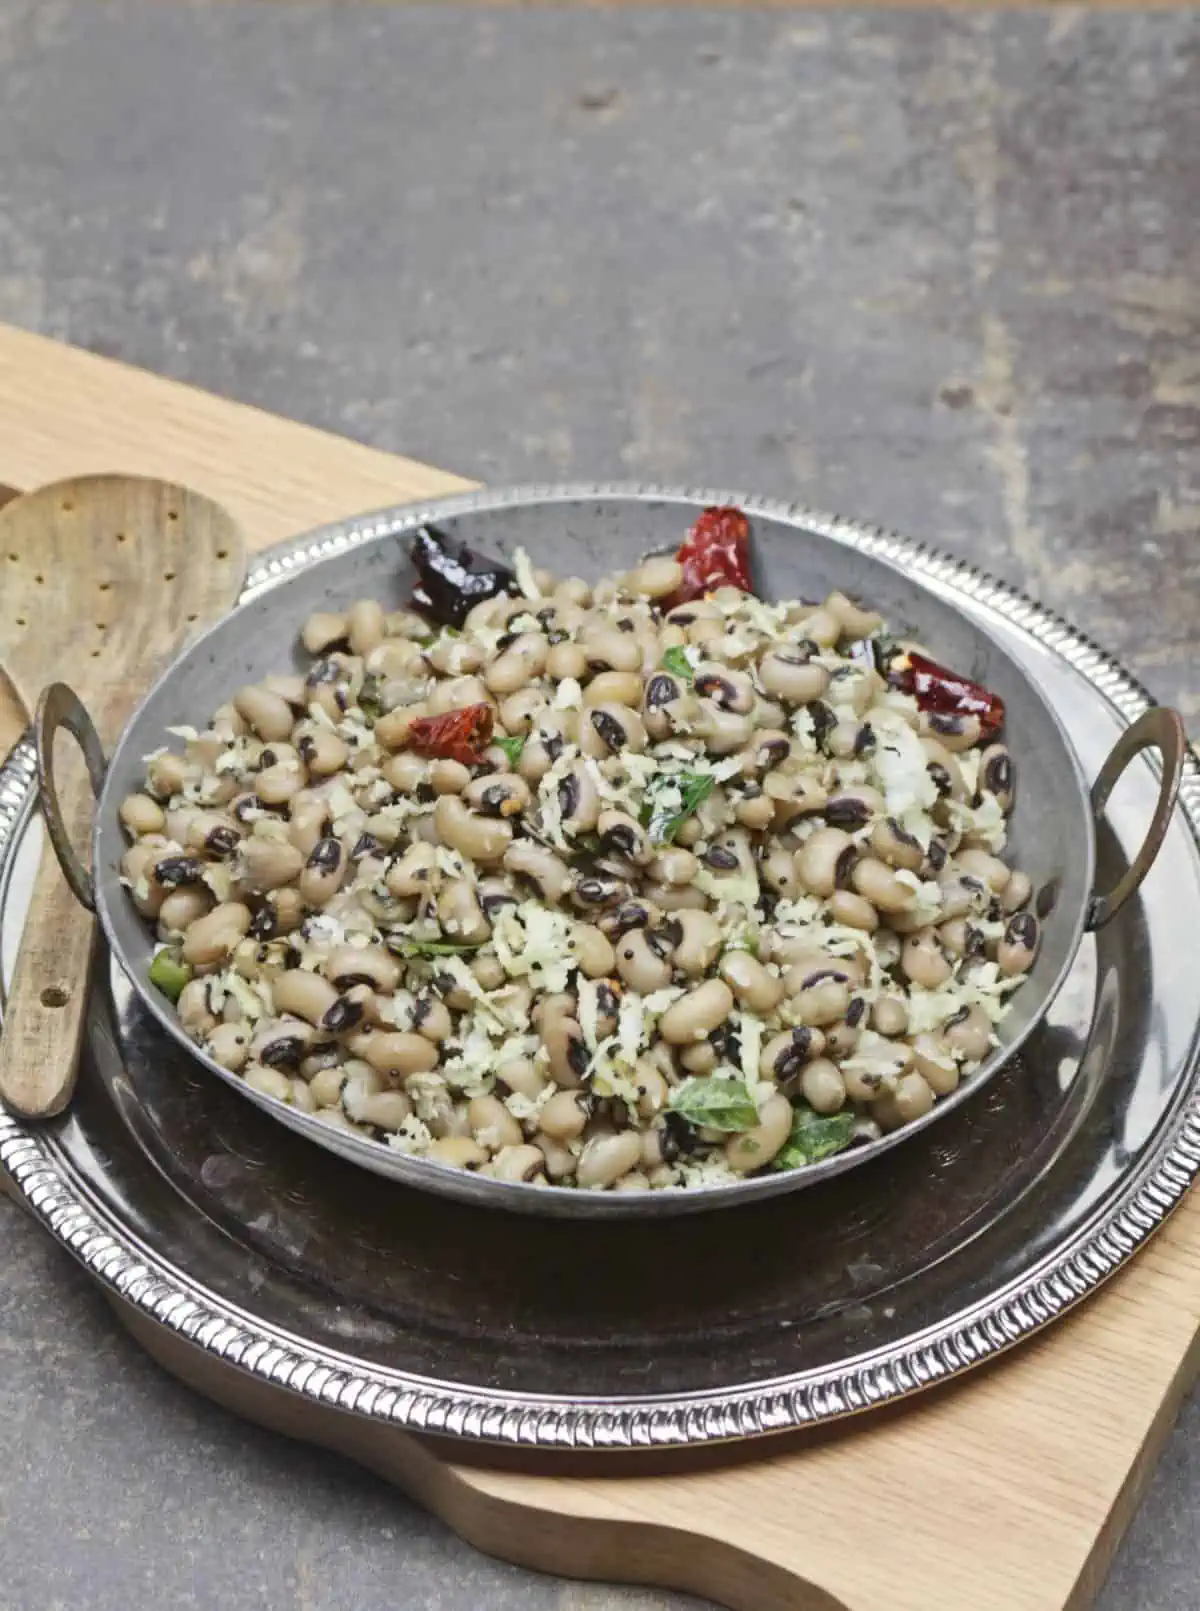 black-eyed peas sundal in a wide bowl.